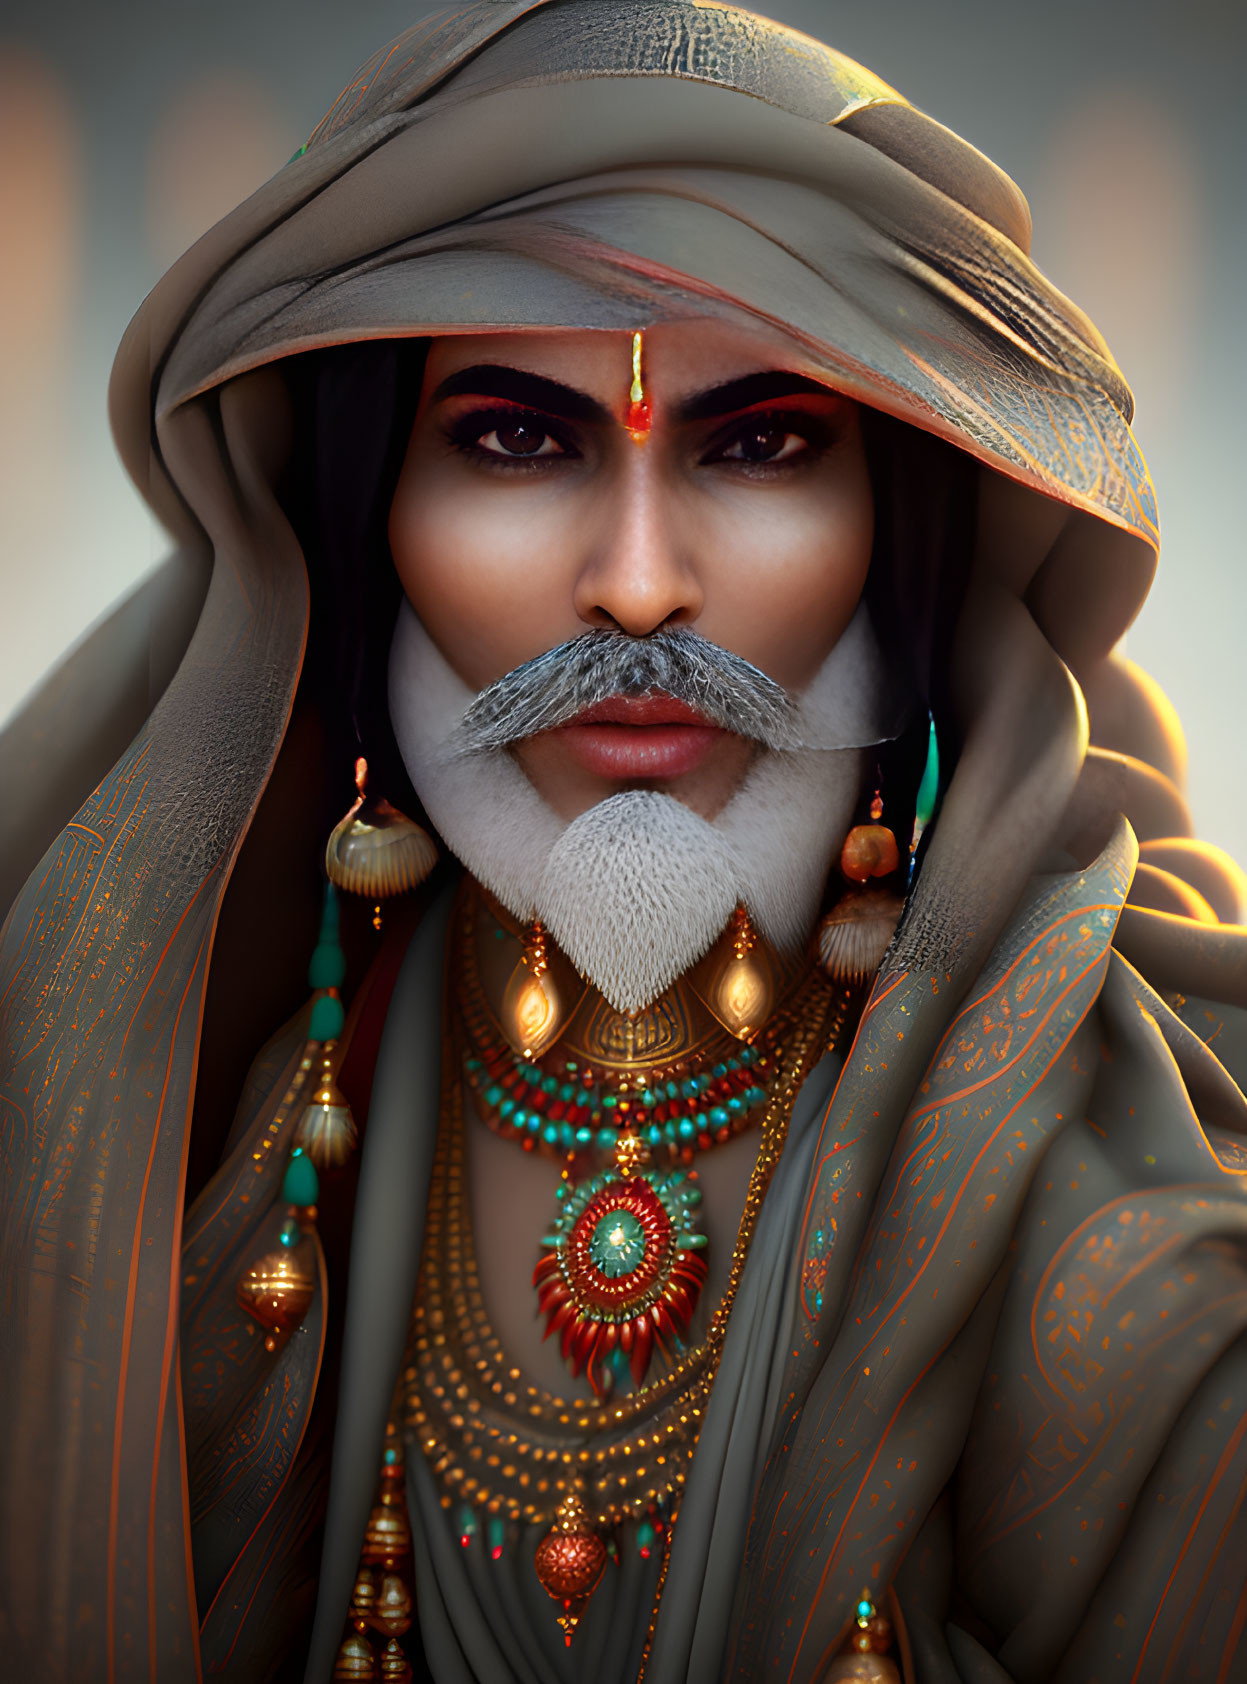 Portrait of person with dramatic gaze, turban, jewelry, and white mustache on soft background